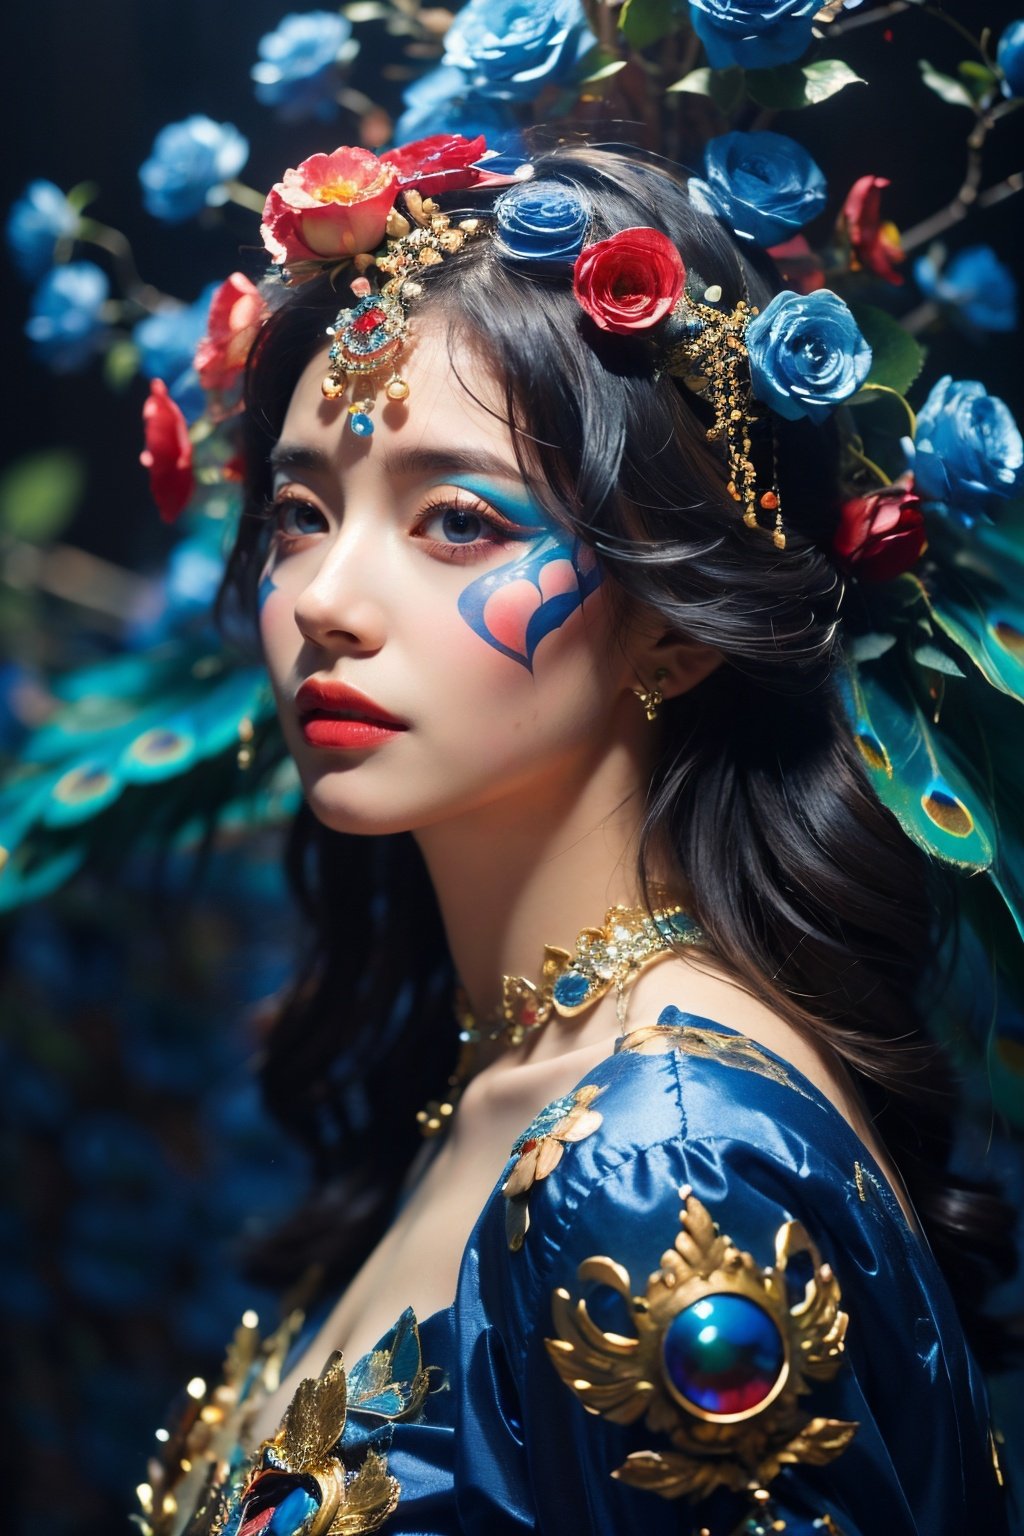 Best Quality, masterpiece, ultra-high resolution, (photo realistic: 1.4) , Surrealism, Fantastical verisimilitude, beautiful blue-skinned goddess Phoenix Peacock on her head, fantastical creation, thriller color scheme, surrealism, abstract, psychedelic, 1 girl,flower,castle